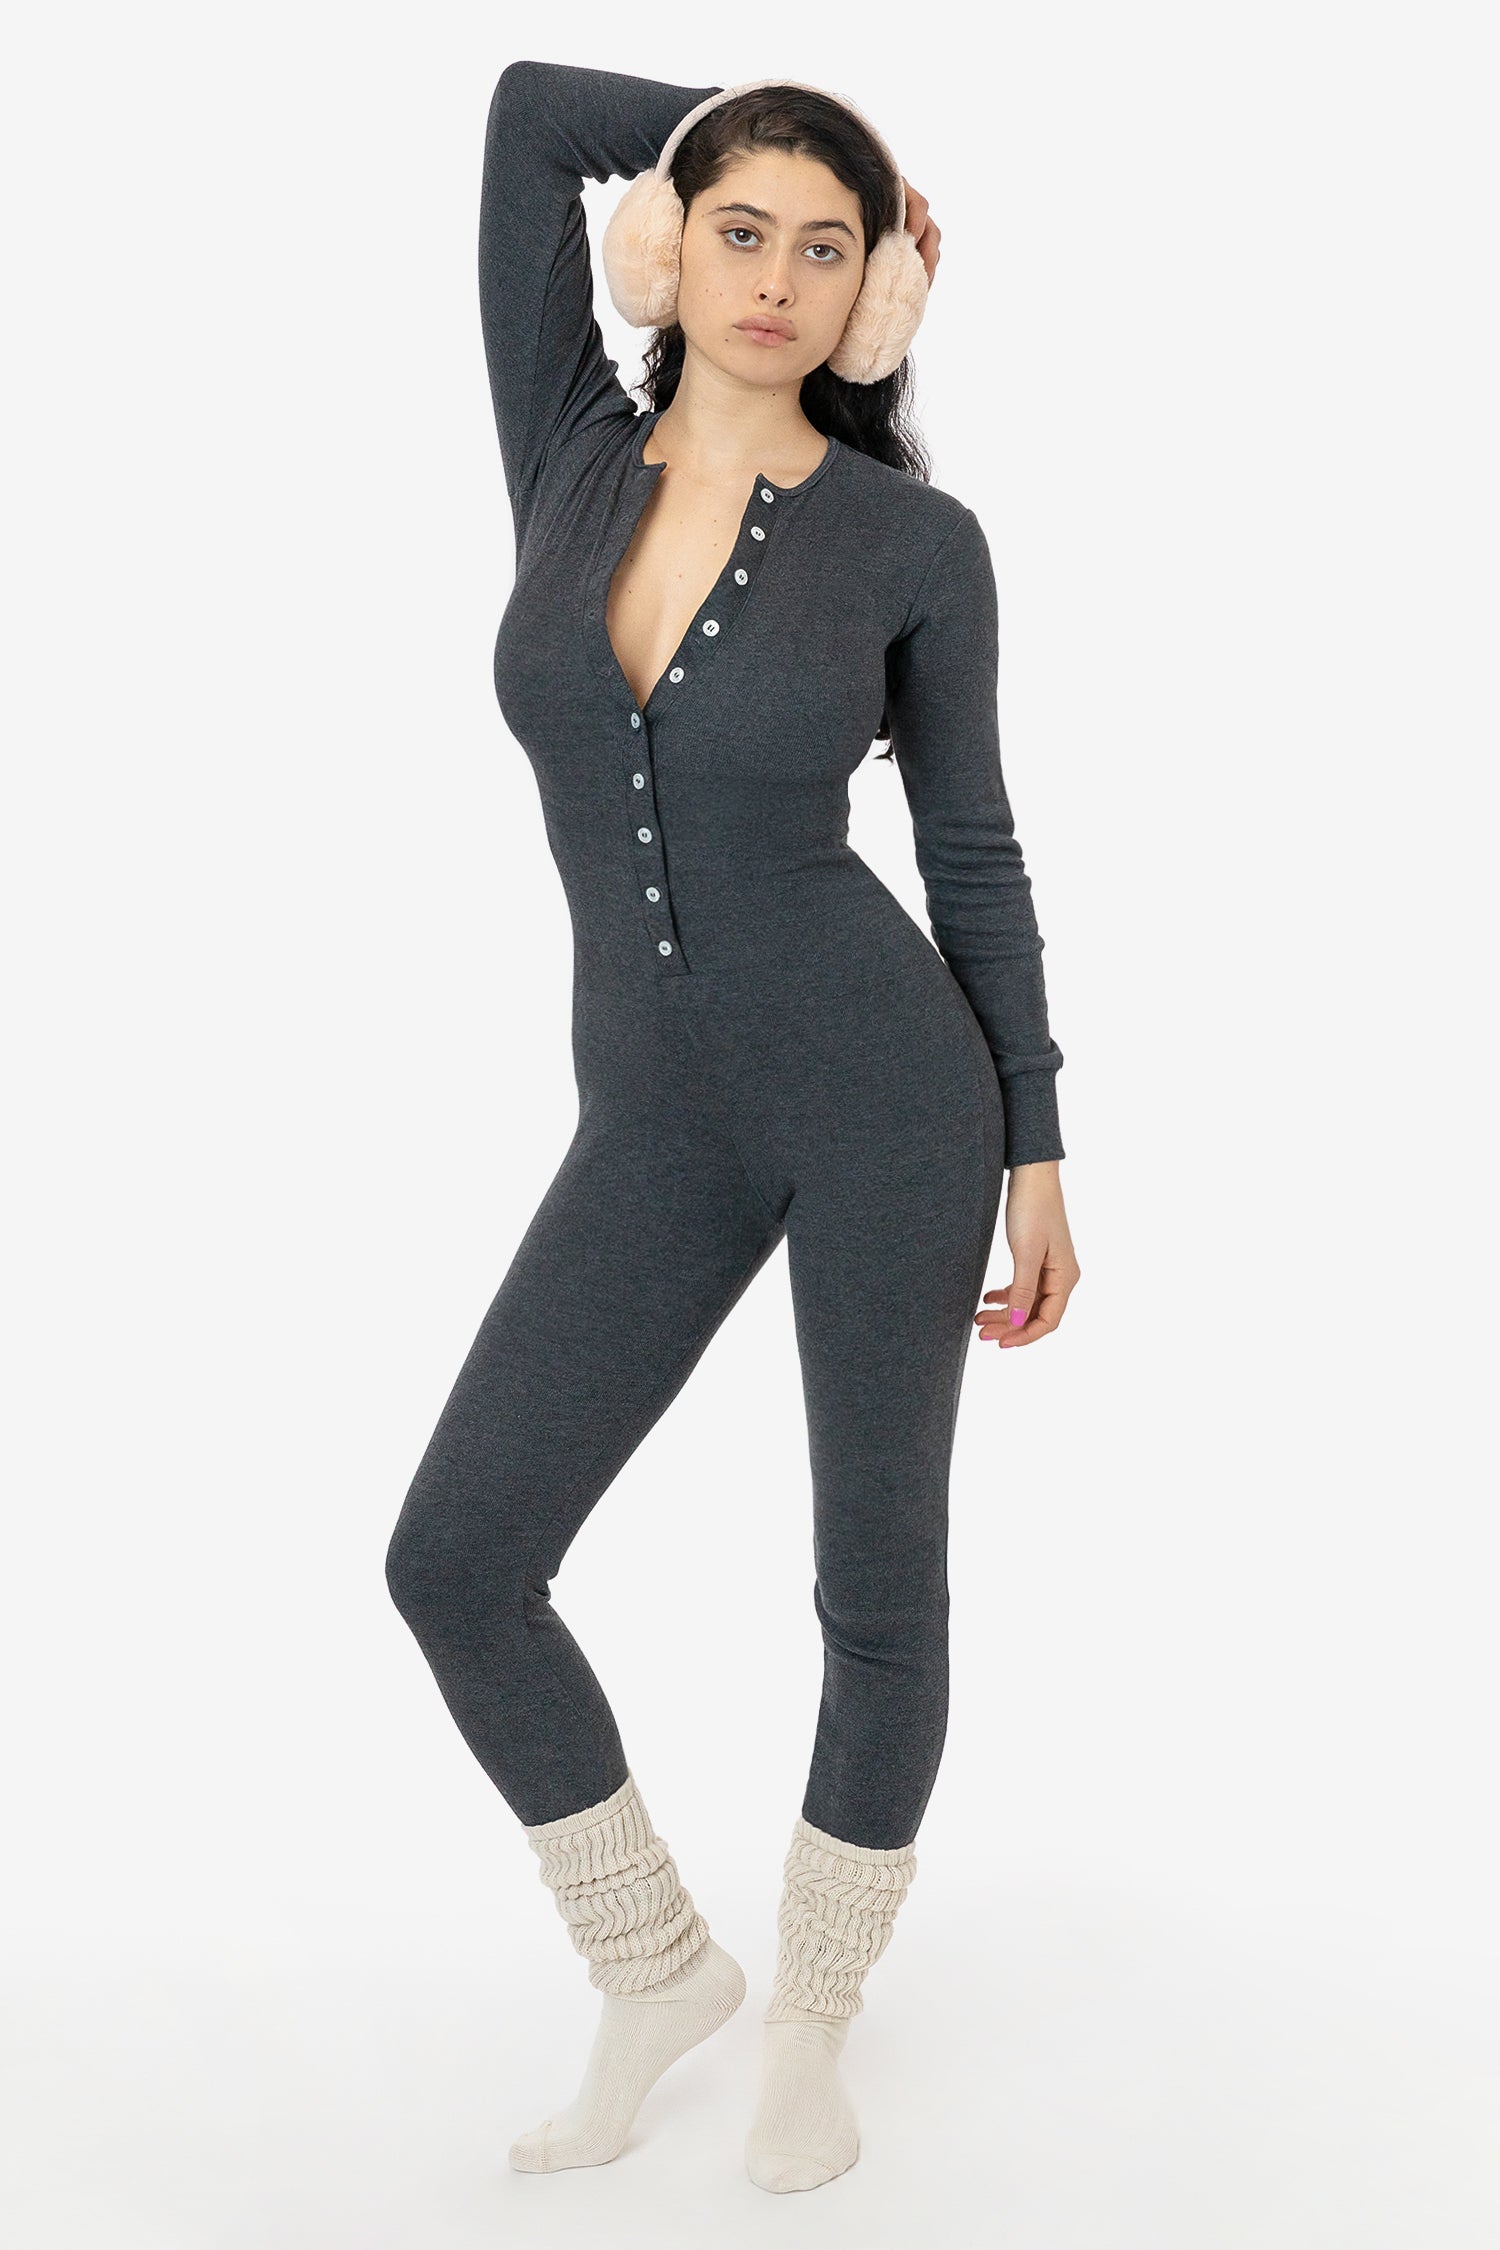 Women's Thermals and Long Johns